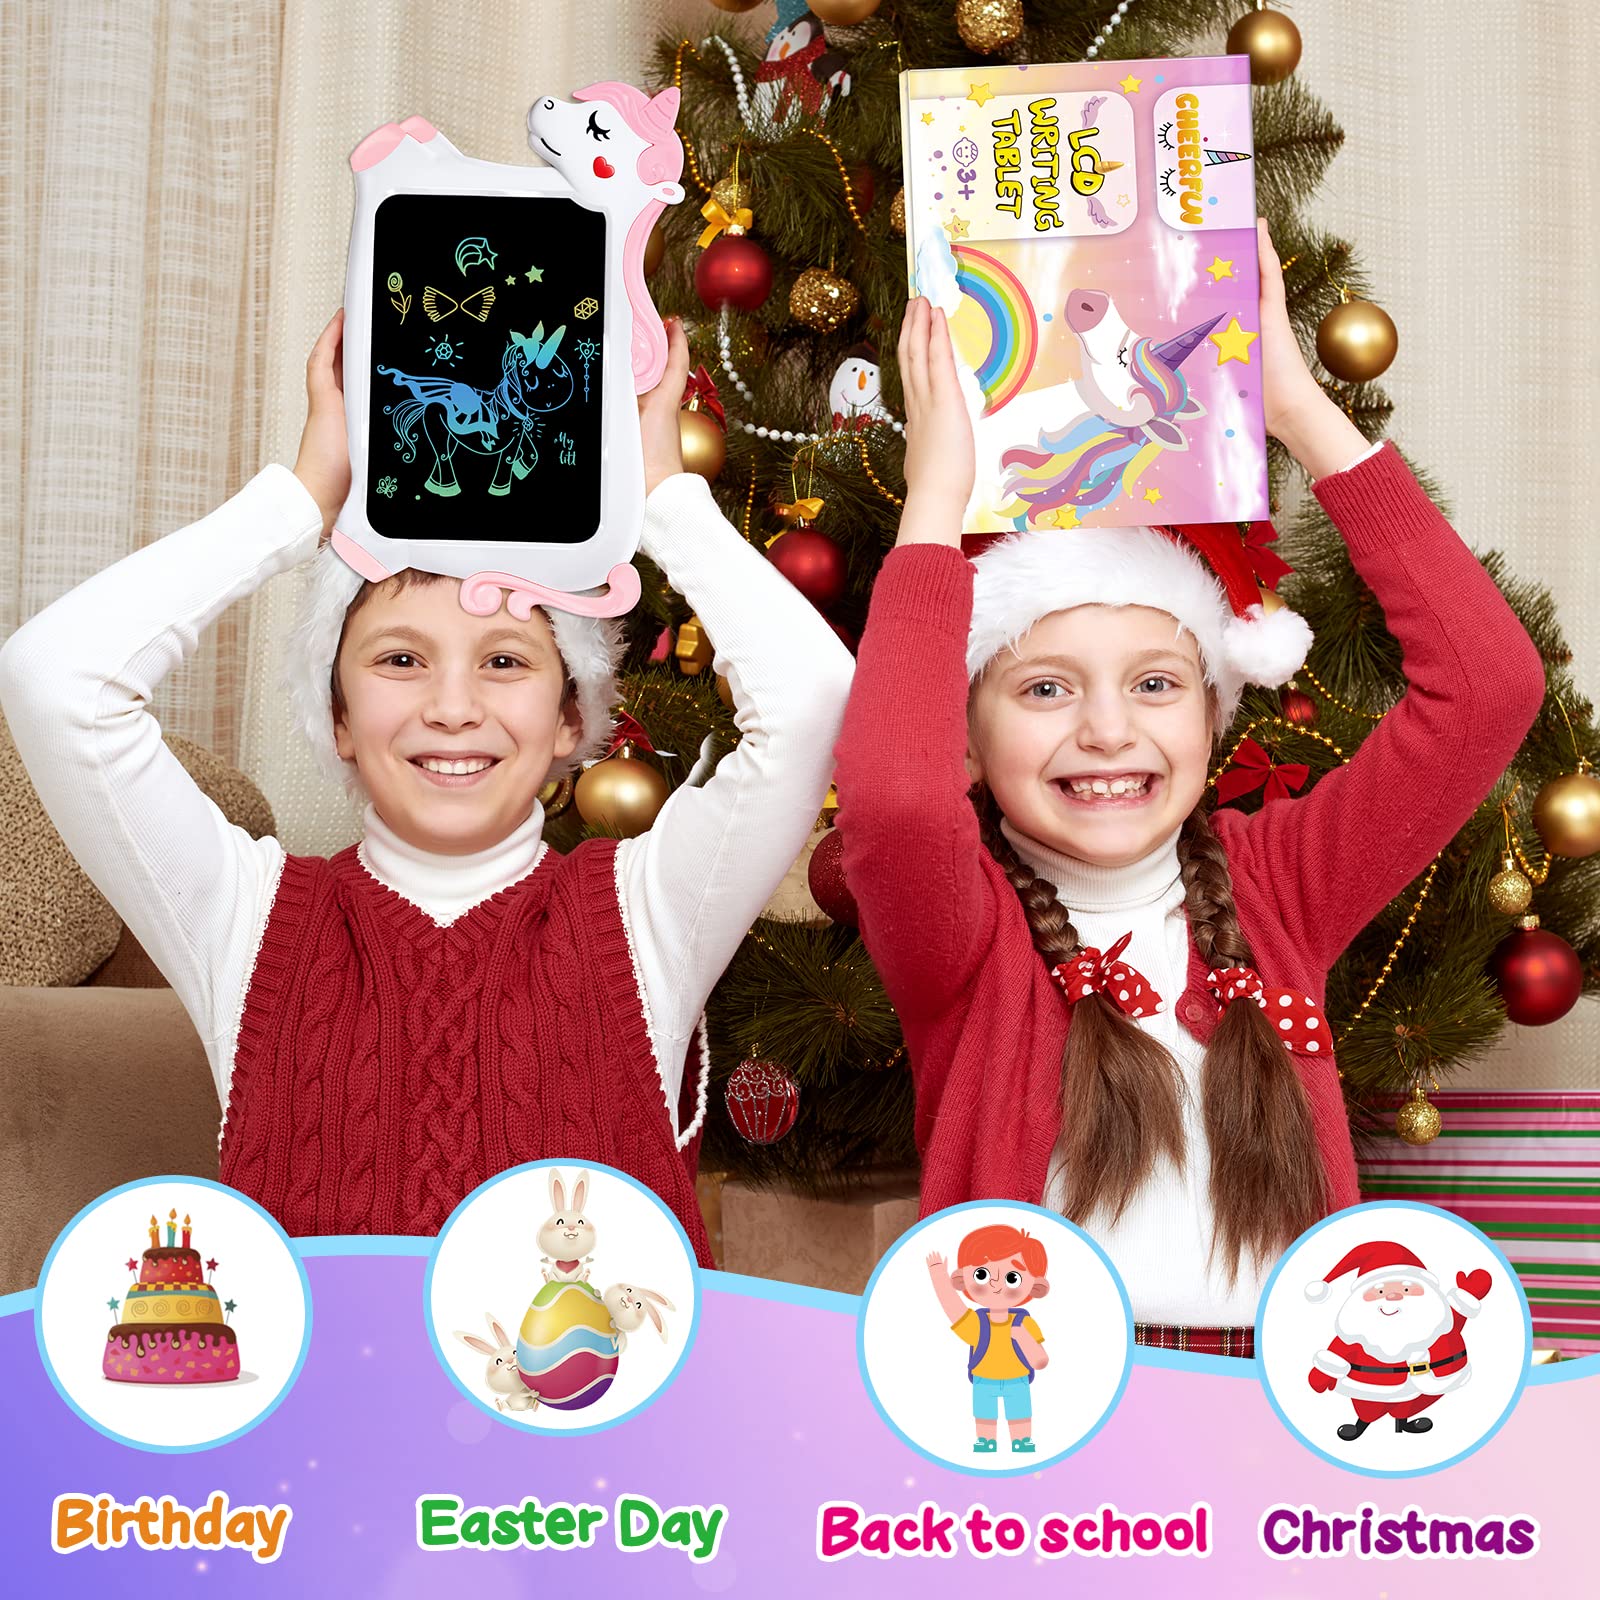 Unicorn Toy Gifts for Girls Boys - CHEERFUN LCD Writing Tablet for Kids | Toddler Travel Road Trip Essential Toy Gift for 3+4 5 6 7 8 Year Old | Doodle Draw Board | Easter Gifts Learning Birthday